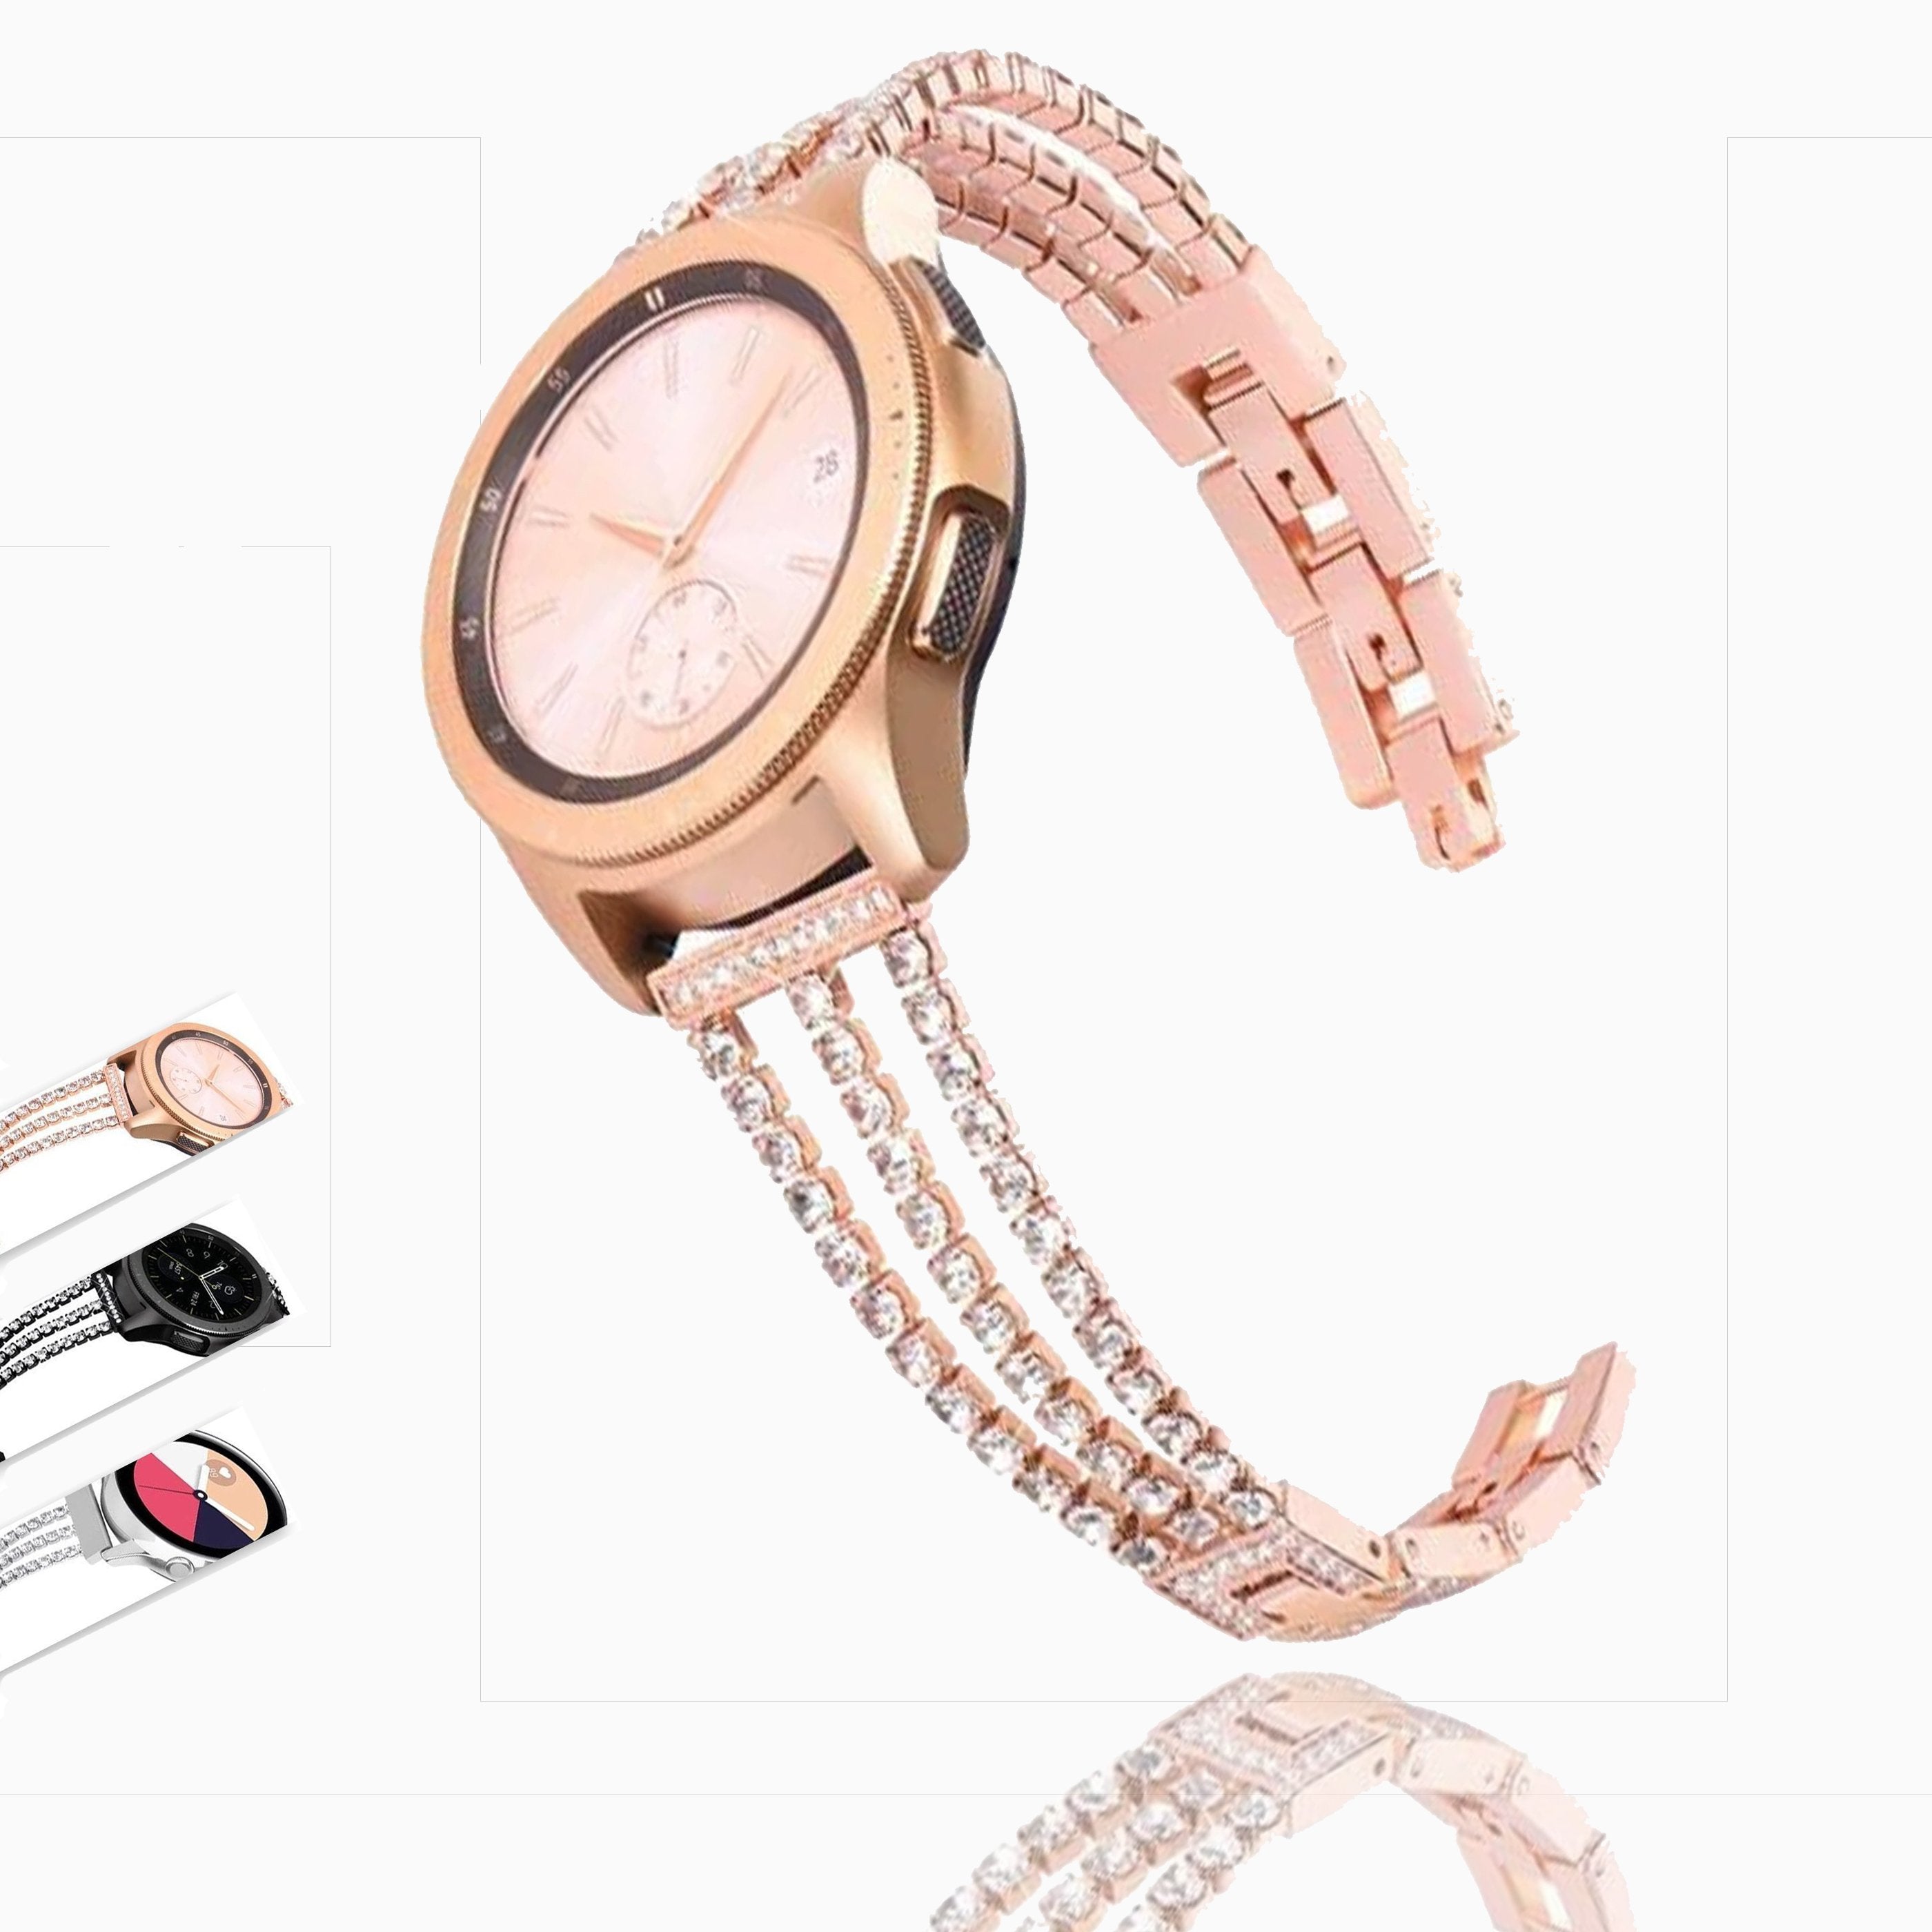  20mm Dressy Bands Compatible with Samsung Galaxy Watch 6/Watch  5/Watch 4/Watch 3/Active 2/Active Watch Bands Women's Bling Metal Wristband  Strap, Black : Cell Phones & Accessories